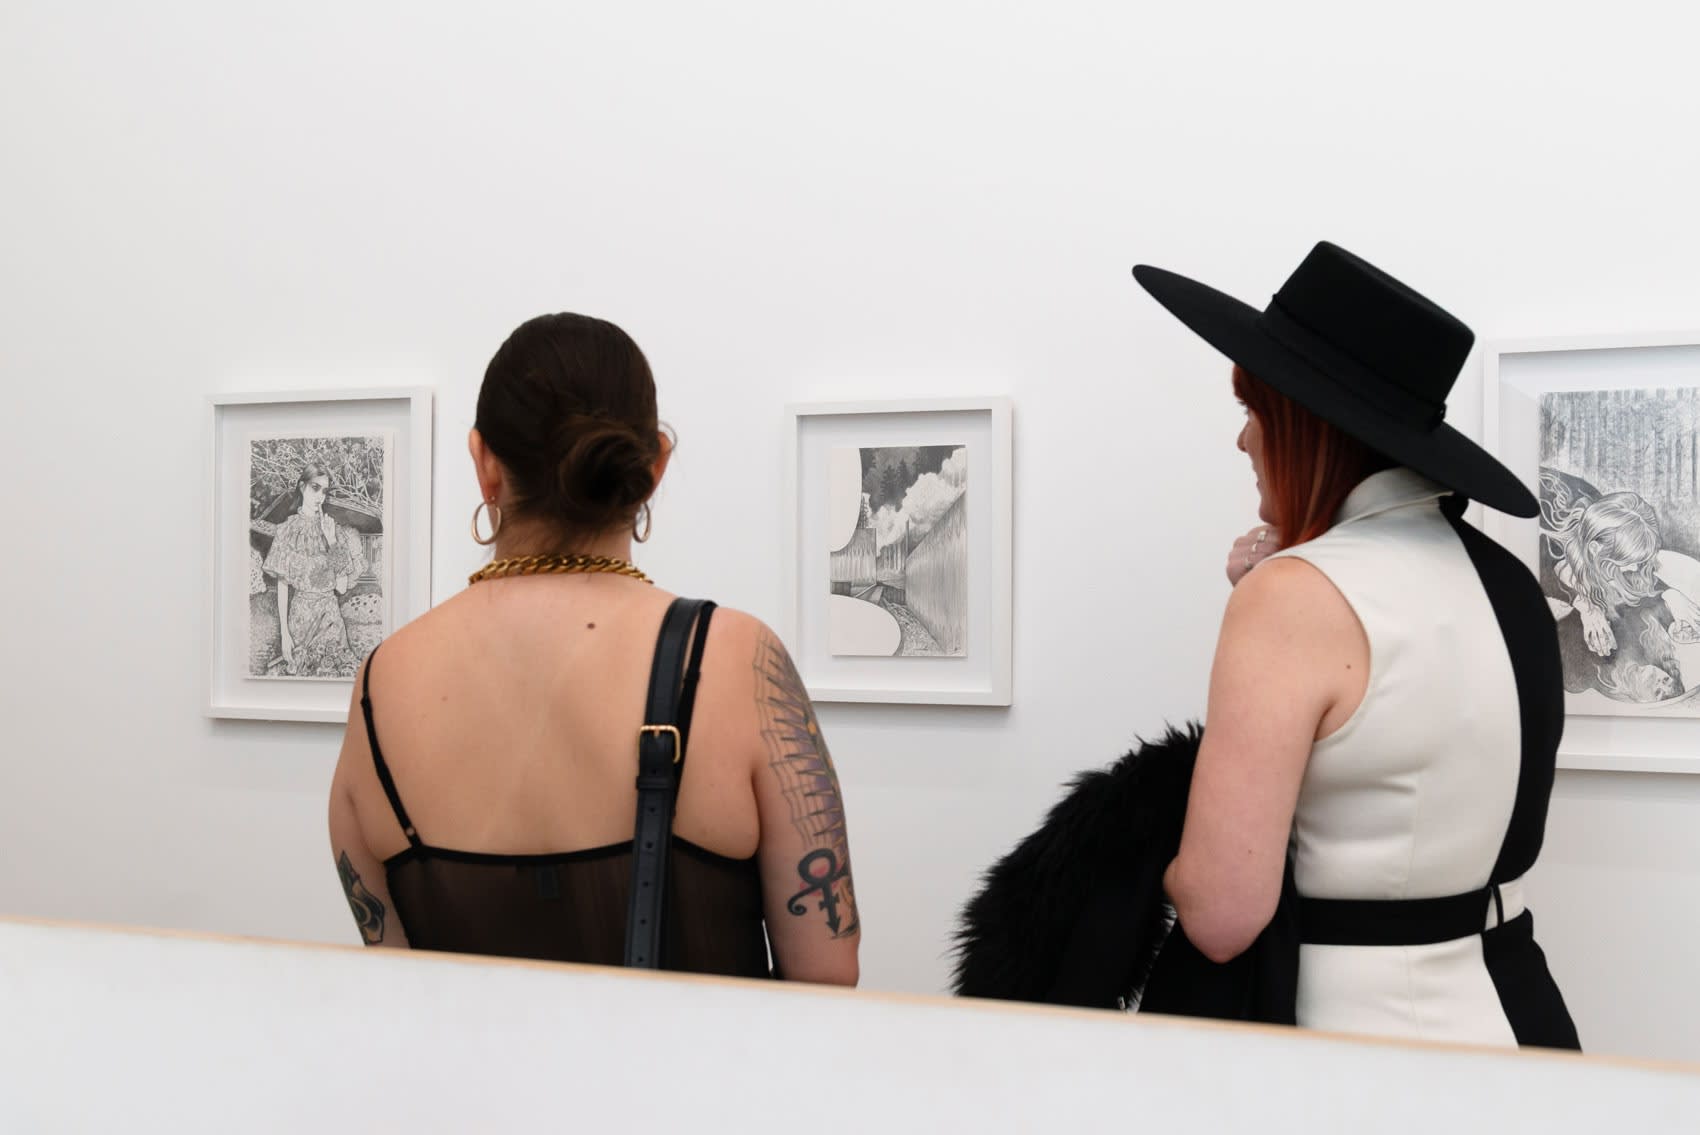 Two women stand in front of Martine Johanna's black and white drawings of young women. The drawings are framed and on a white wall in the reception area of an art gallery. 